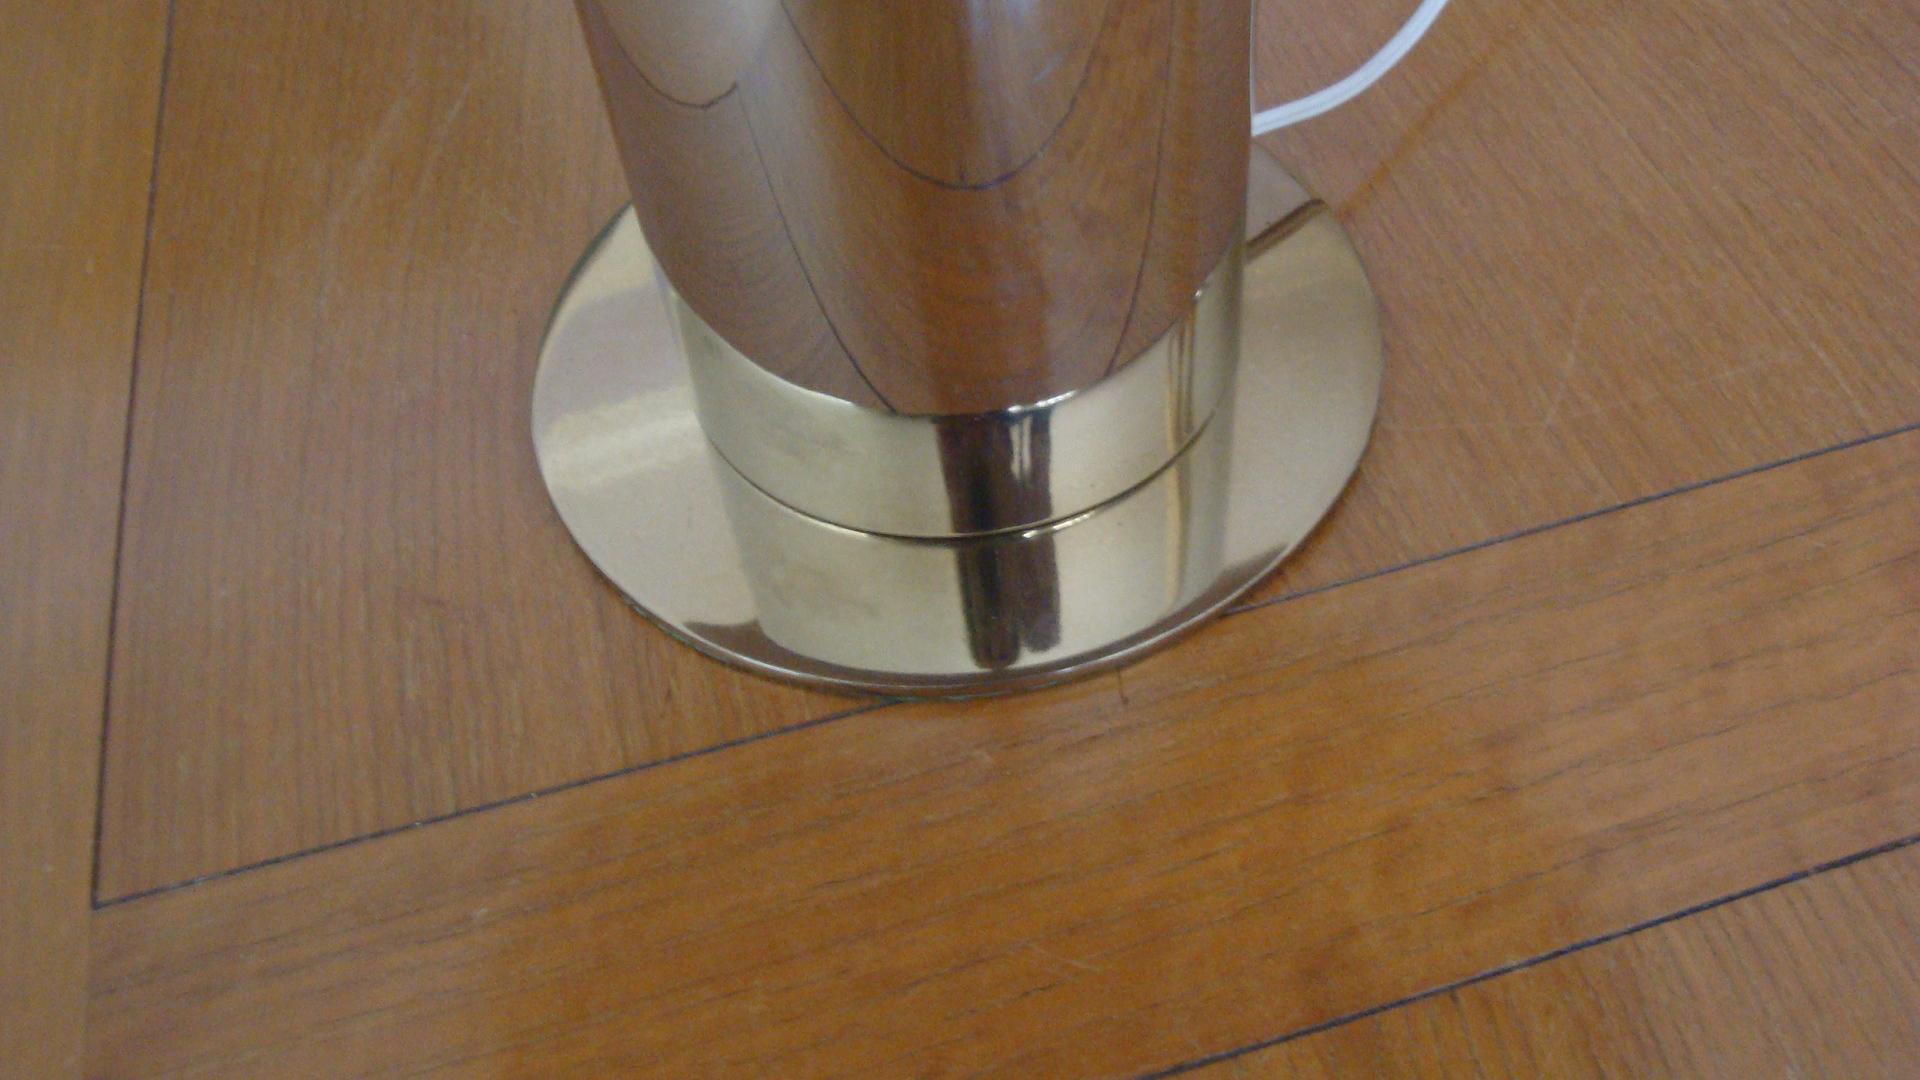 This is a Chrome cylinder lamp on a brass base with a black metal round shade.